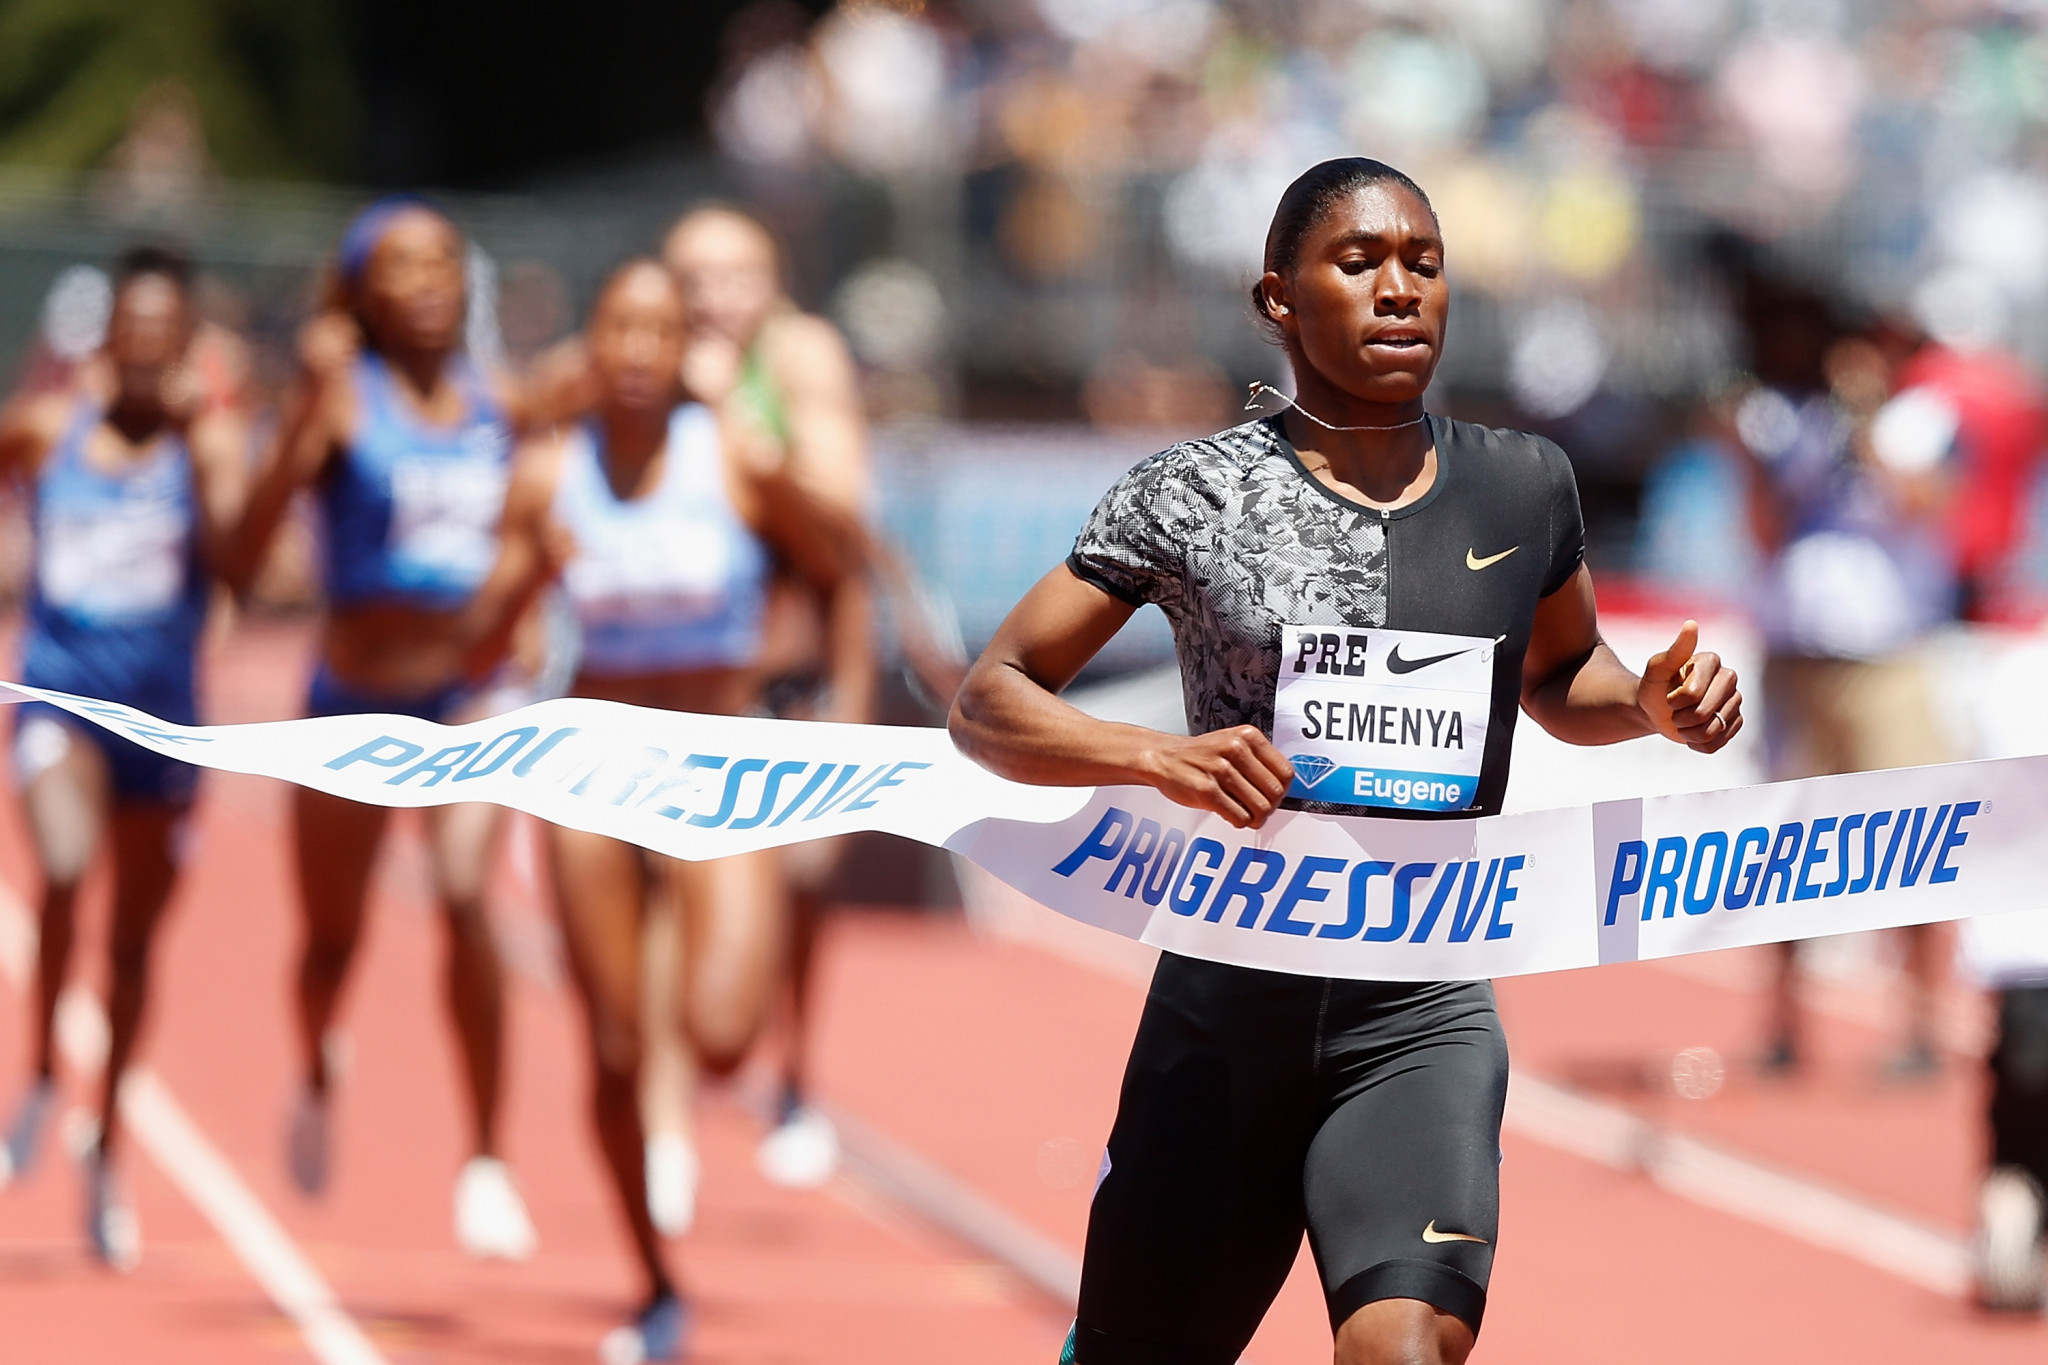 South Africa athletes such as Caster Semenya have been advised to only train at private facilities with insurance ©Getty Images